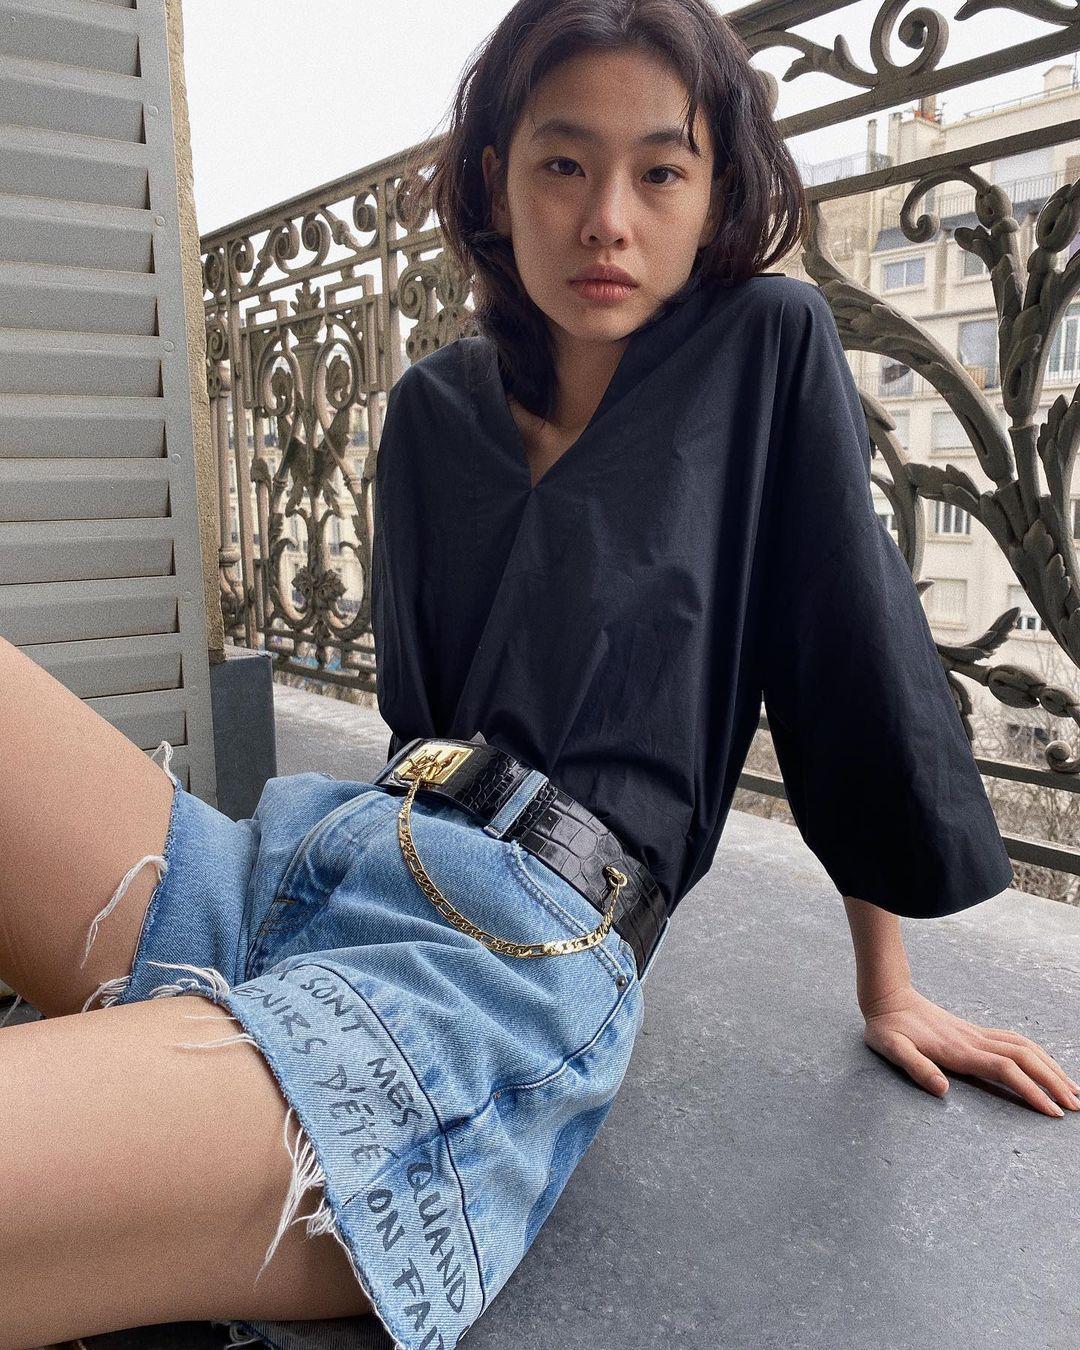 Squid Game's HoYeon Jung is fashion's hottest property right now